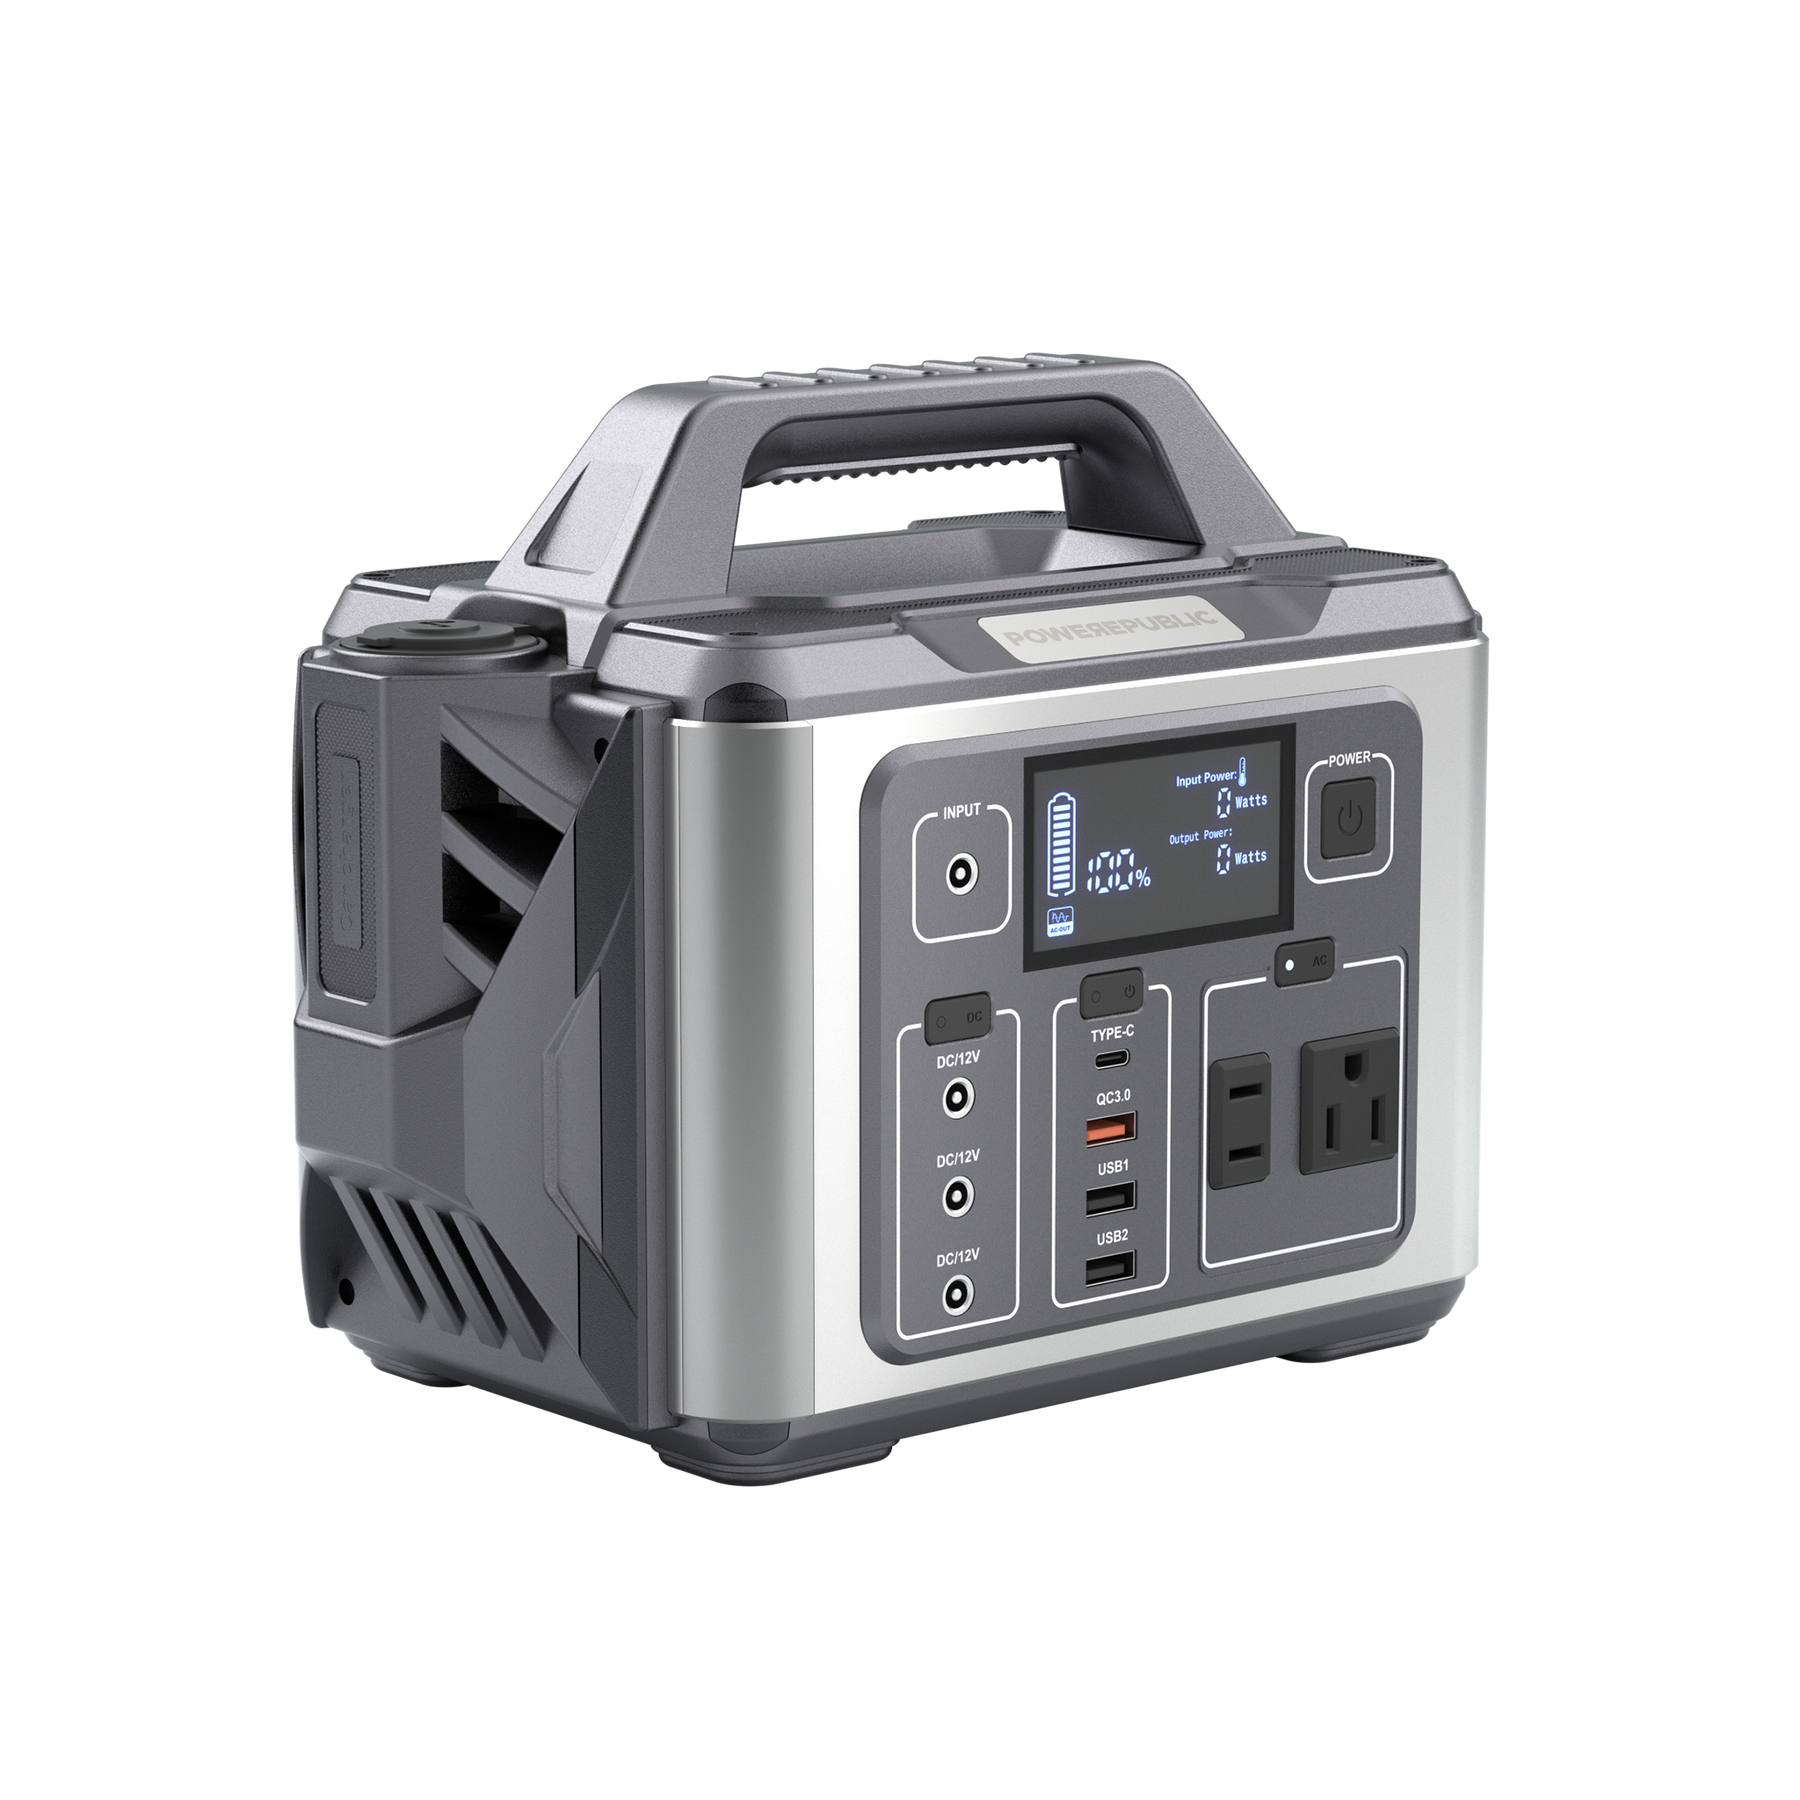 POWEREPUBLIC T306 portable power station, 300W 296Wh, metallic gray body with aircraft wing design, a handle, an LCD screen, and input and output ports.